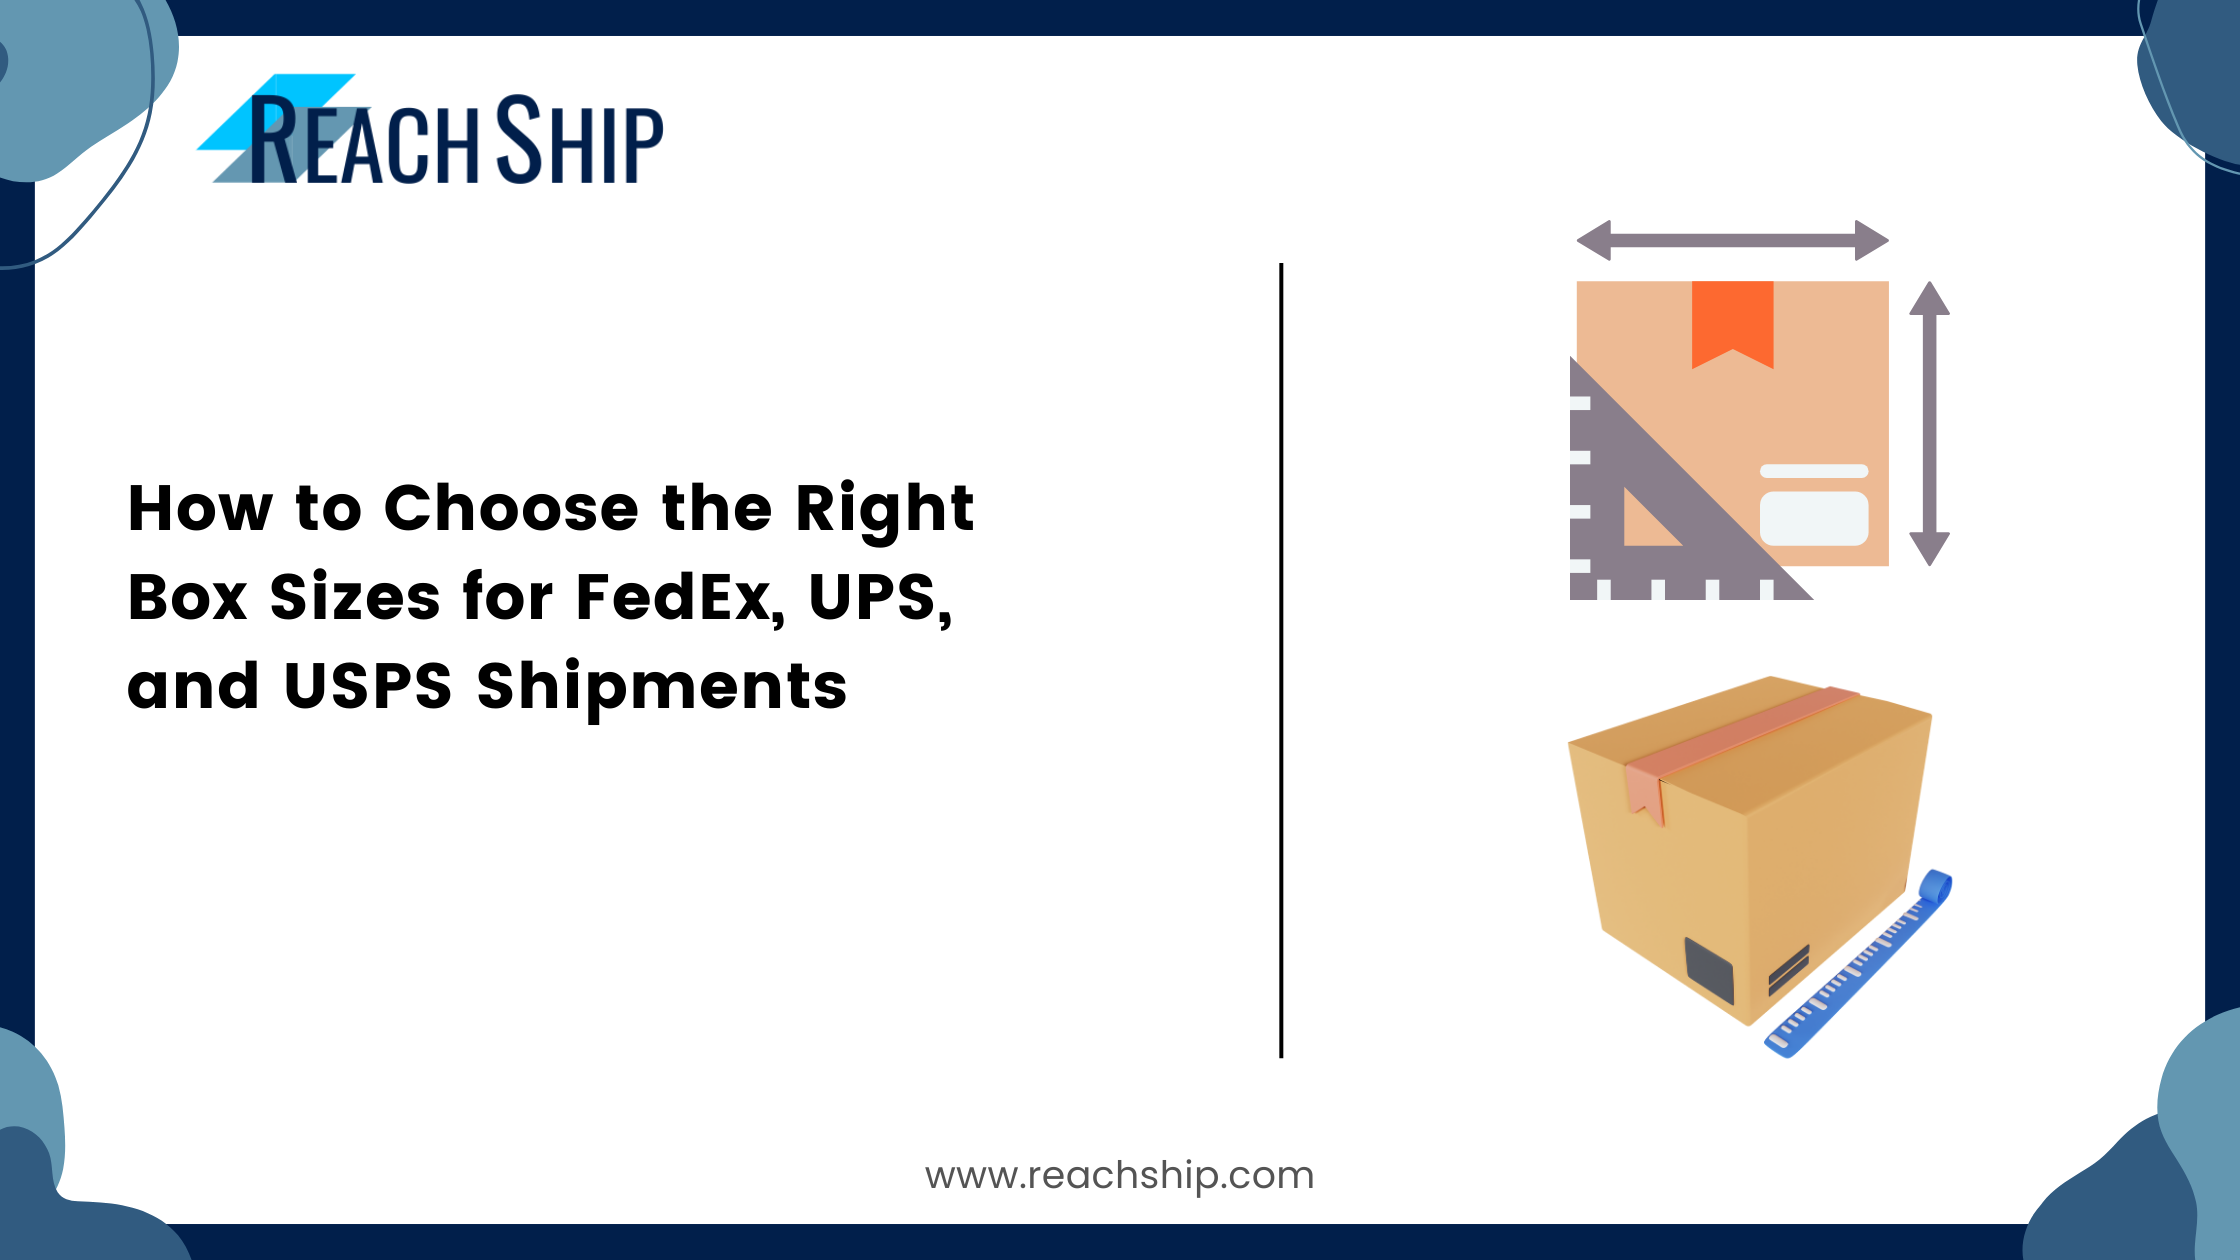 How to Choose the Right Box Sizes for FedEx, UPS, and USPS Shipments